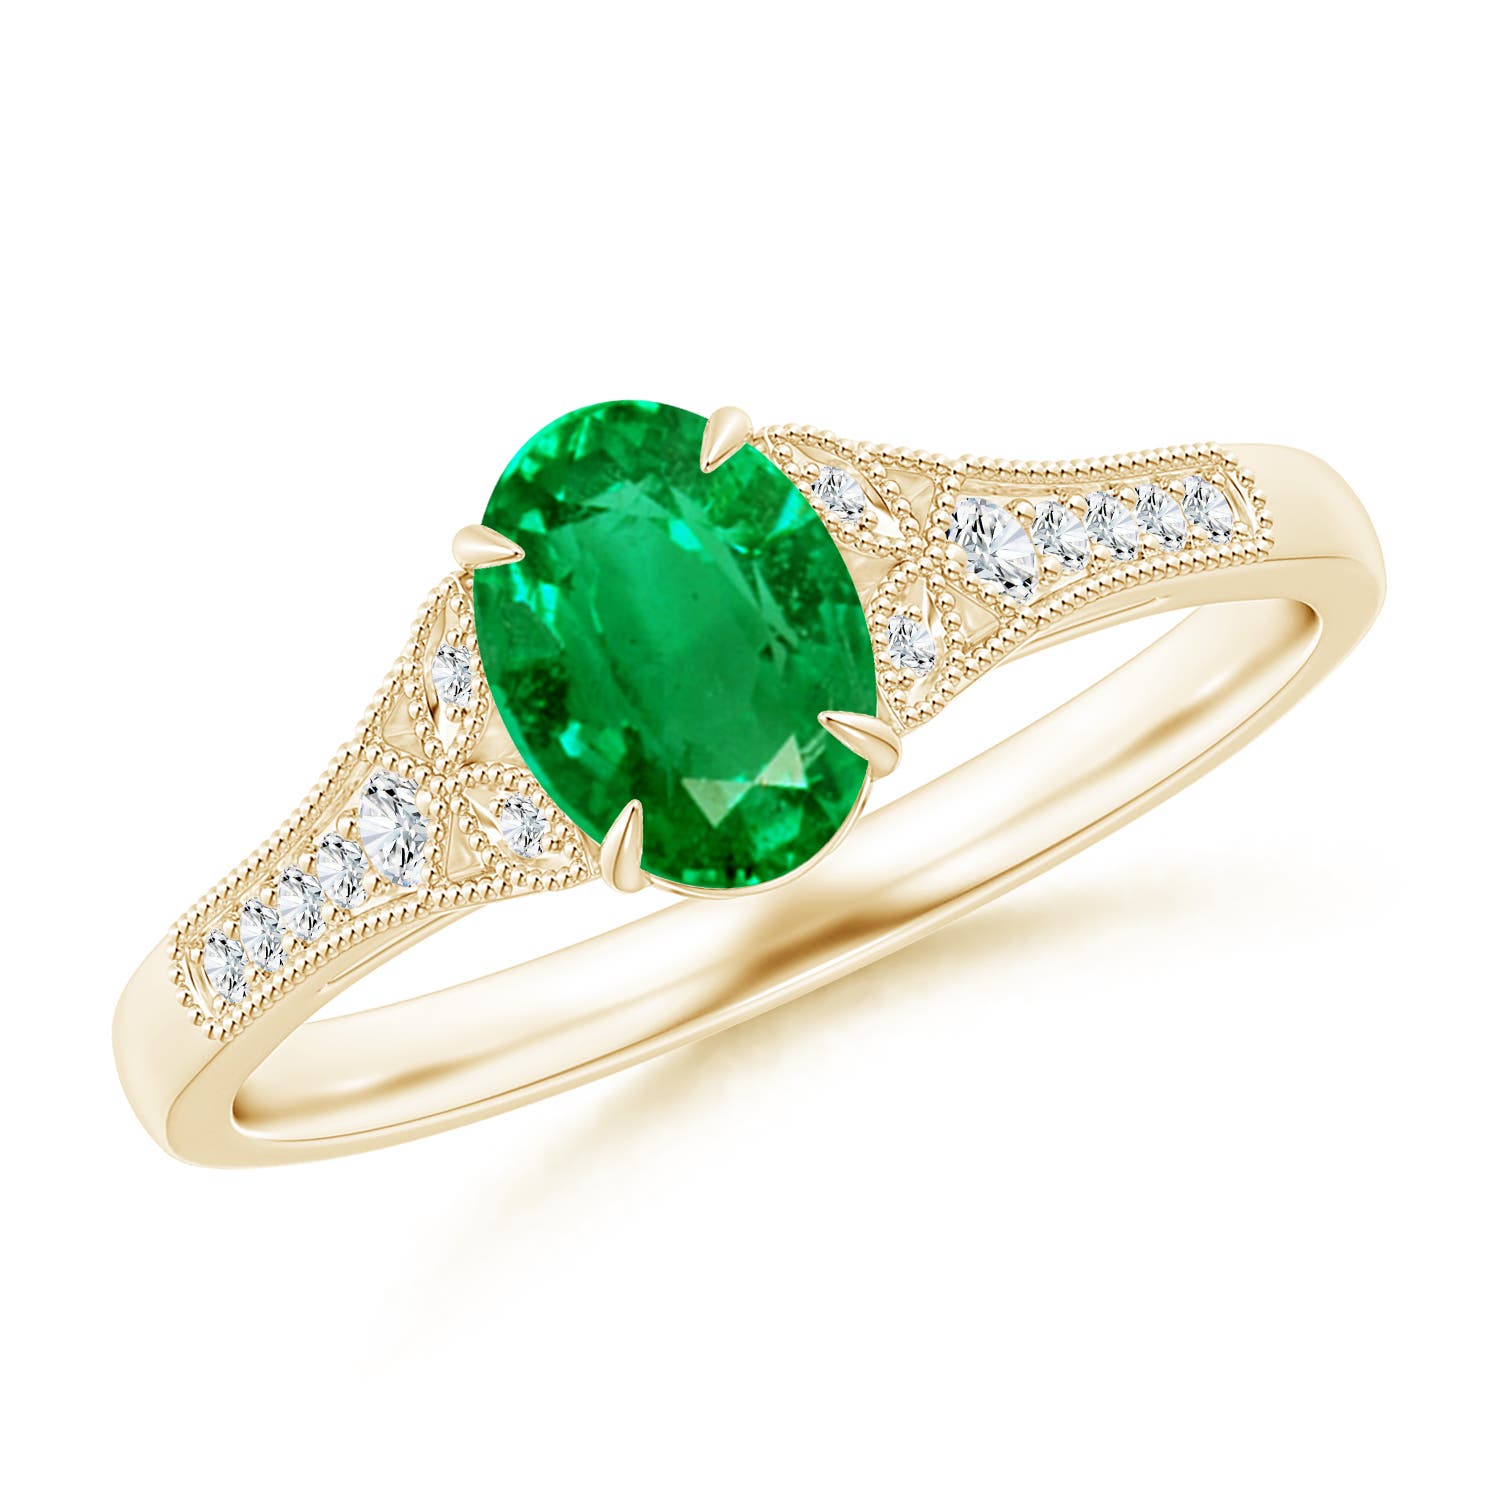 AAA - Emerald / 0.77 CT / 14 KT Yellow Gold